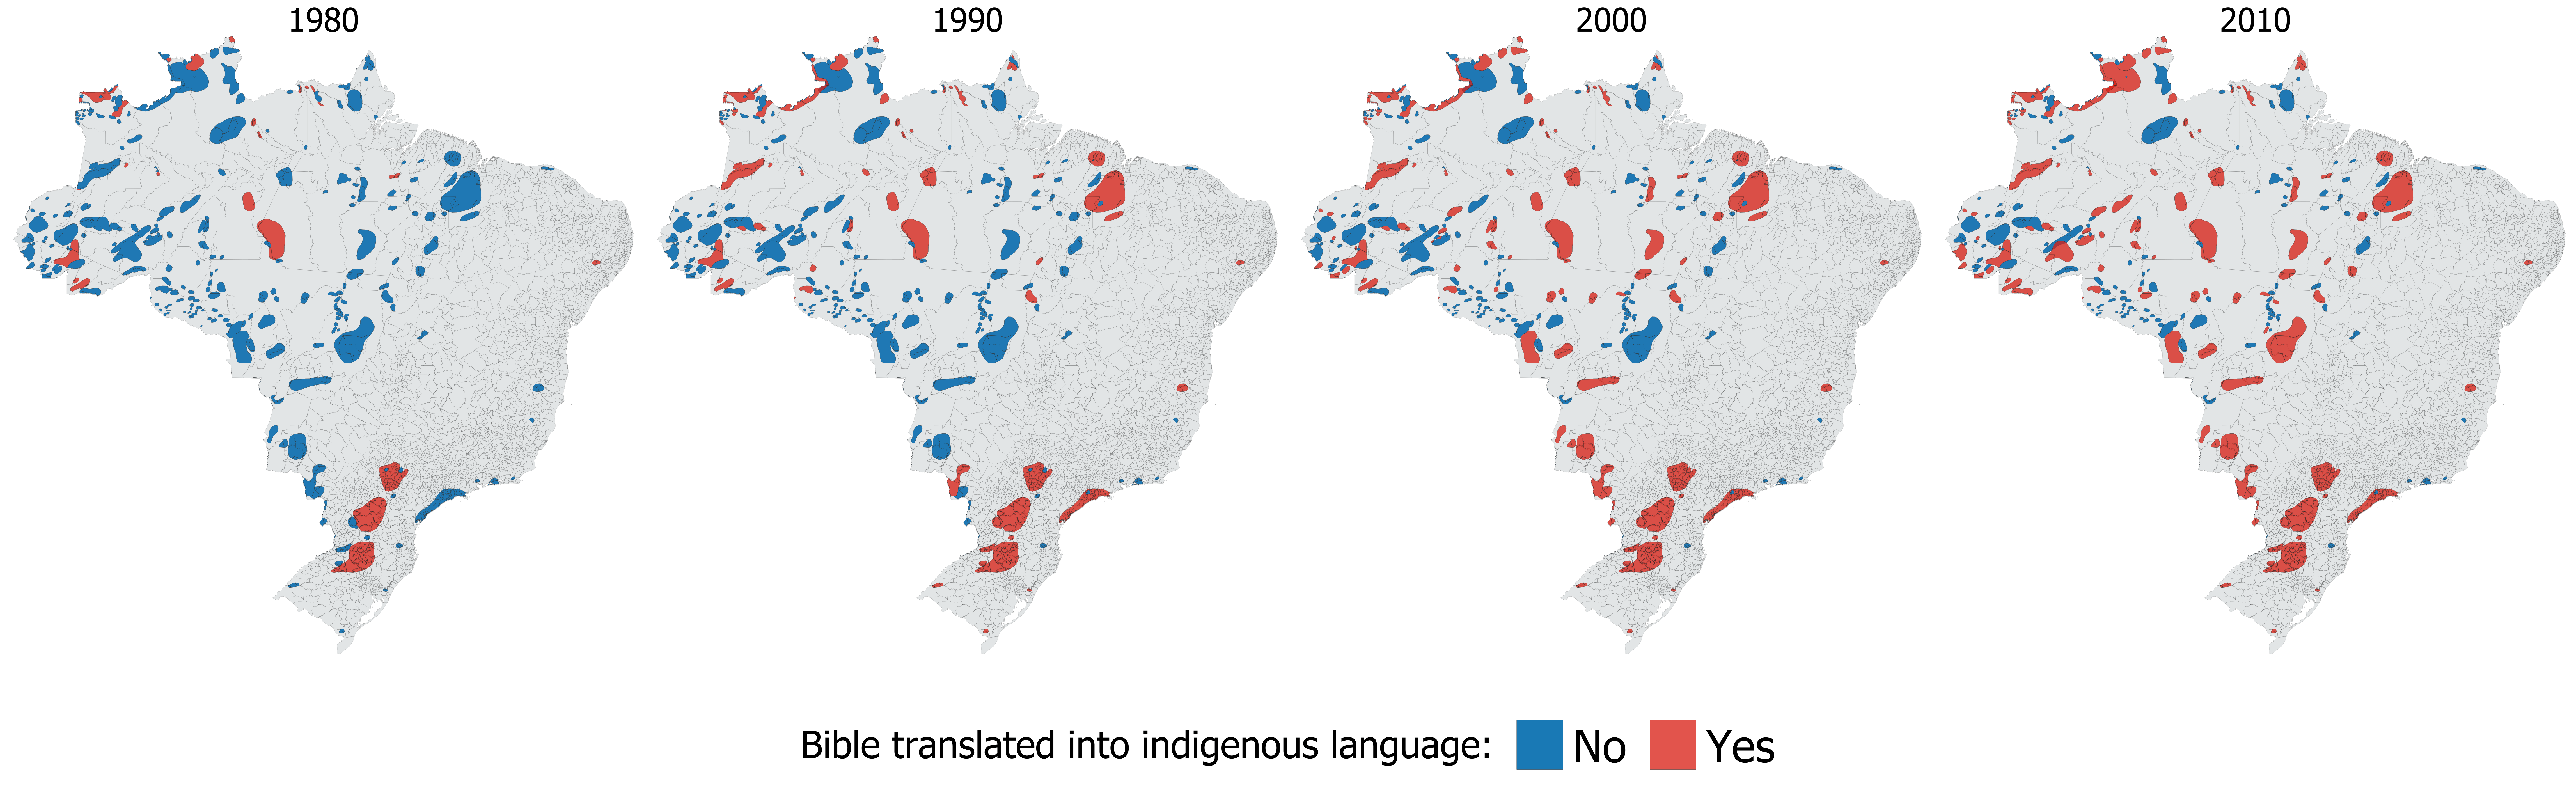 Brother votes for brother: The effects of Pentecostal political influence in Brazil 